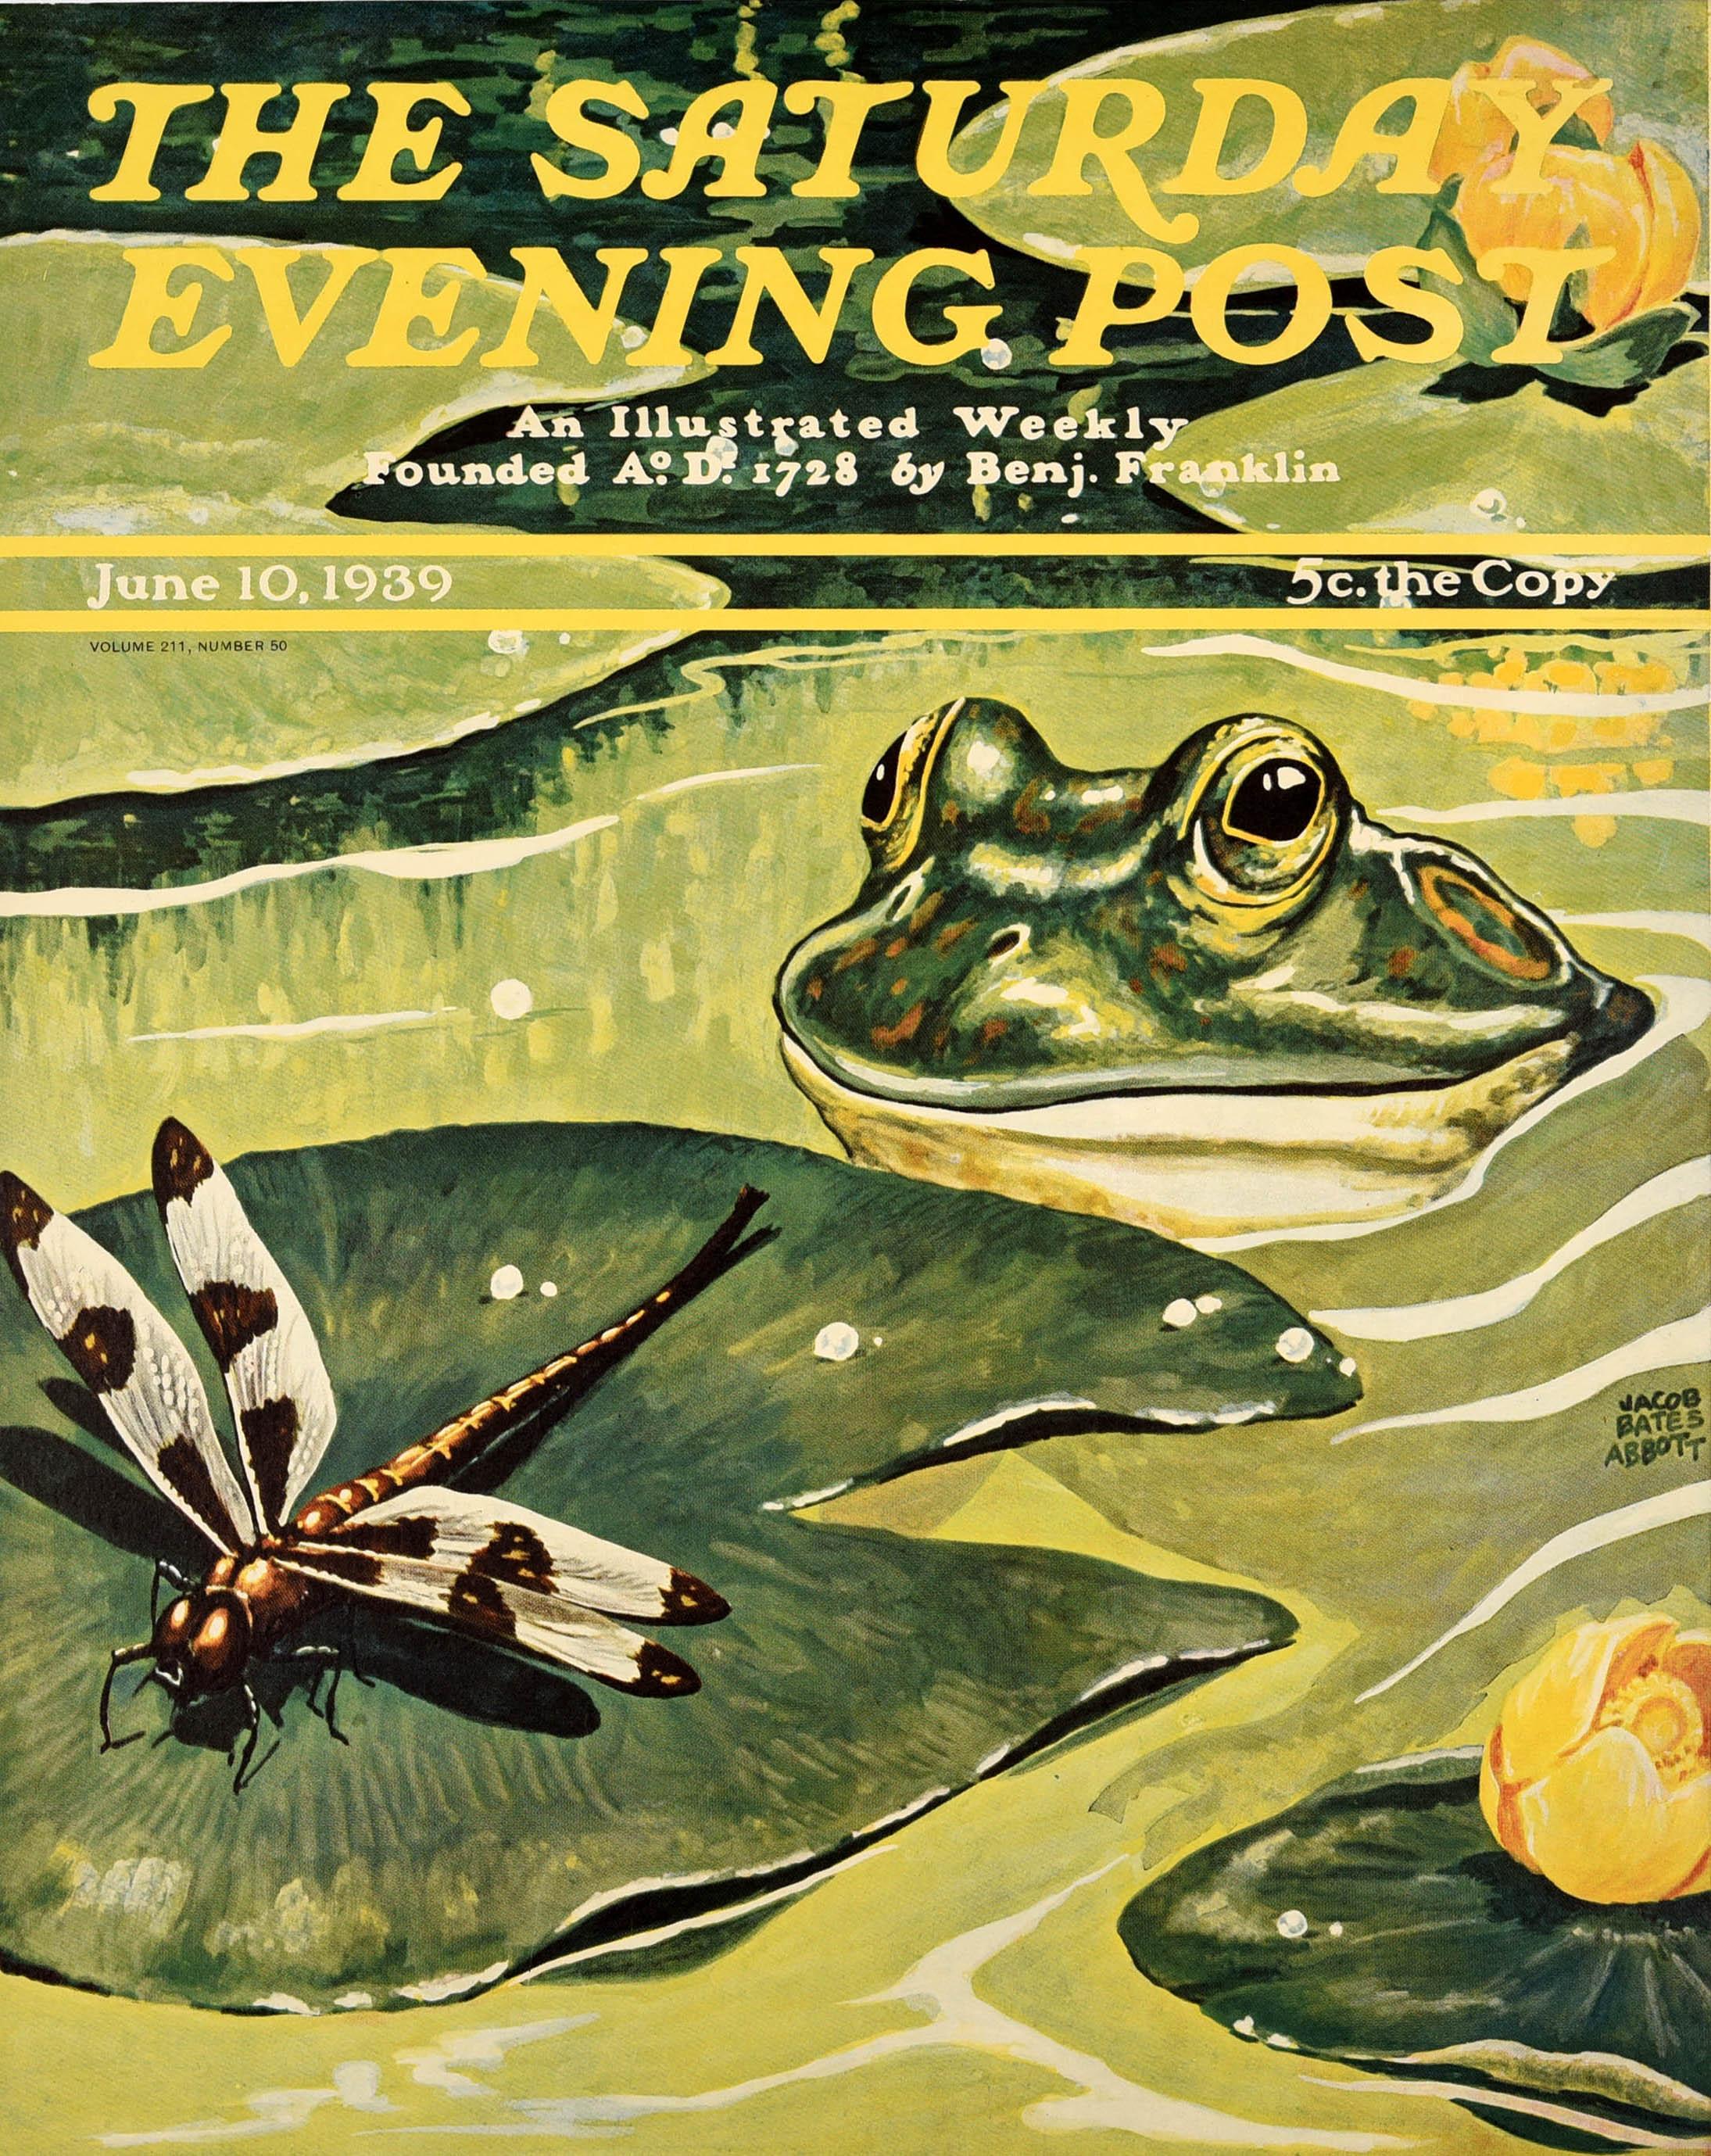 Original vintage advertising poster for The Saturday Evening Post magazine issue 10 June 1939 featuring wildlife artwork by the watercolour painter Jacob Bates Abbott (1895-1950) of a frog swimming in a pond and looking at a dragonfly on a lily pad